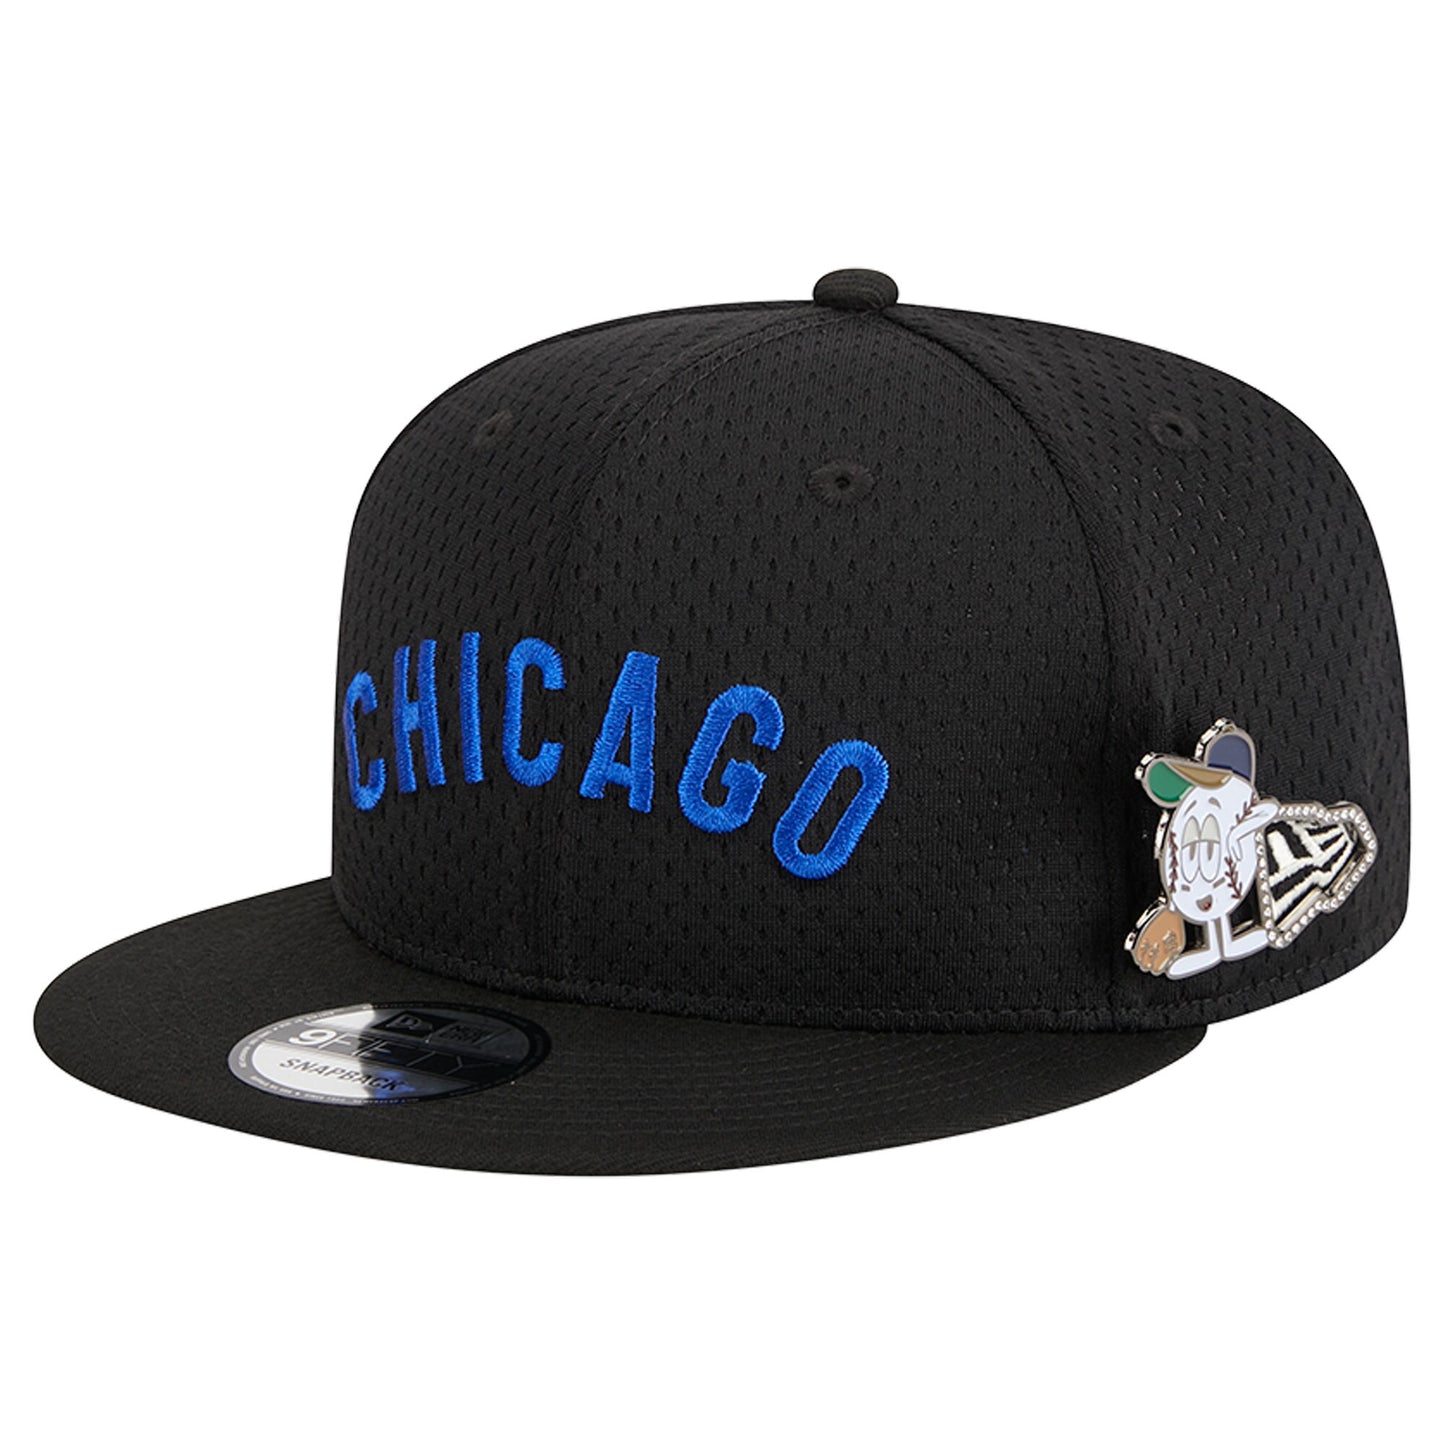 Chicago Cubs New Era Post Up Pin 9FIFTY Snapback Hat - Black